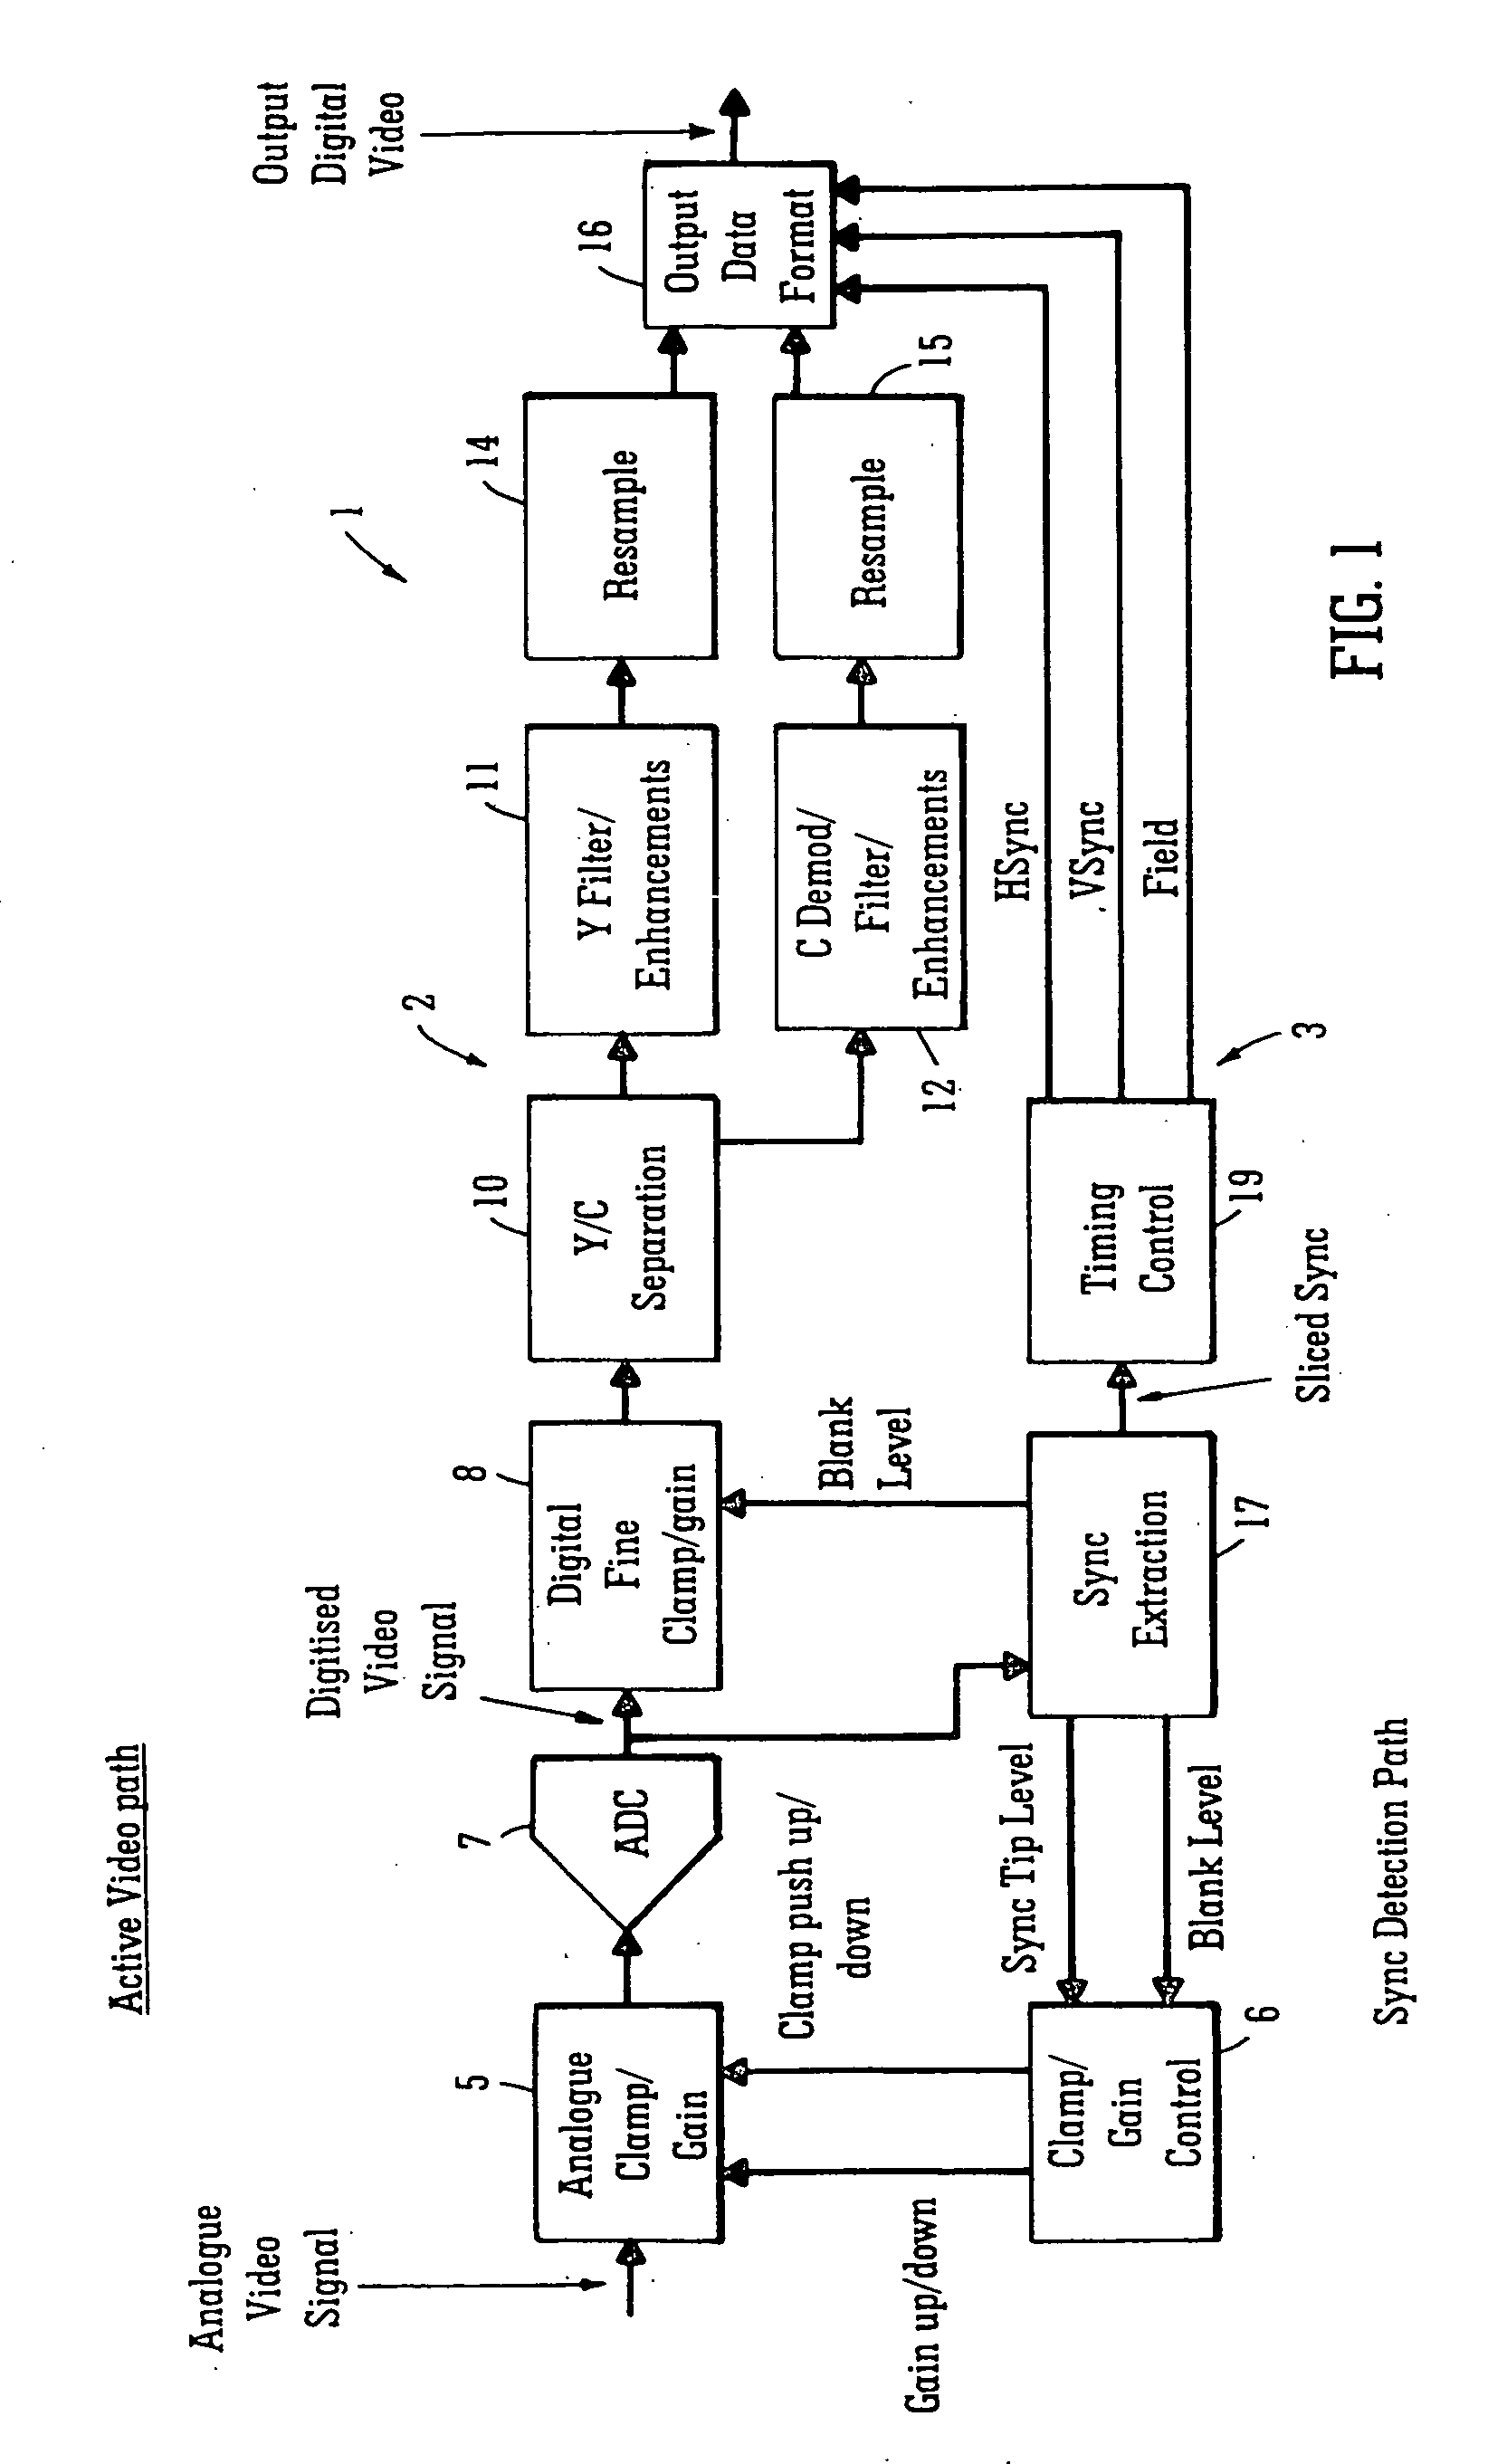 Method and a circuit for deriving a synchronisation signal from a video signal